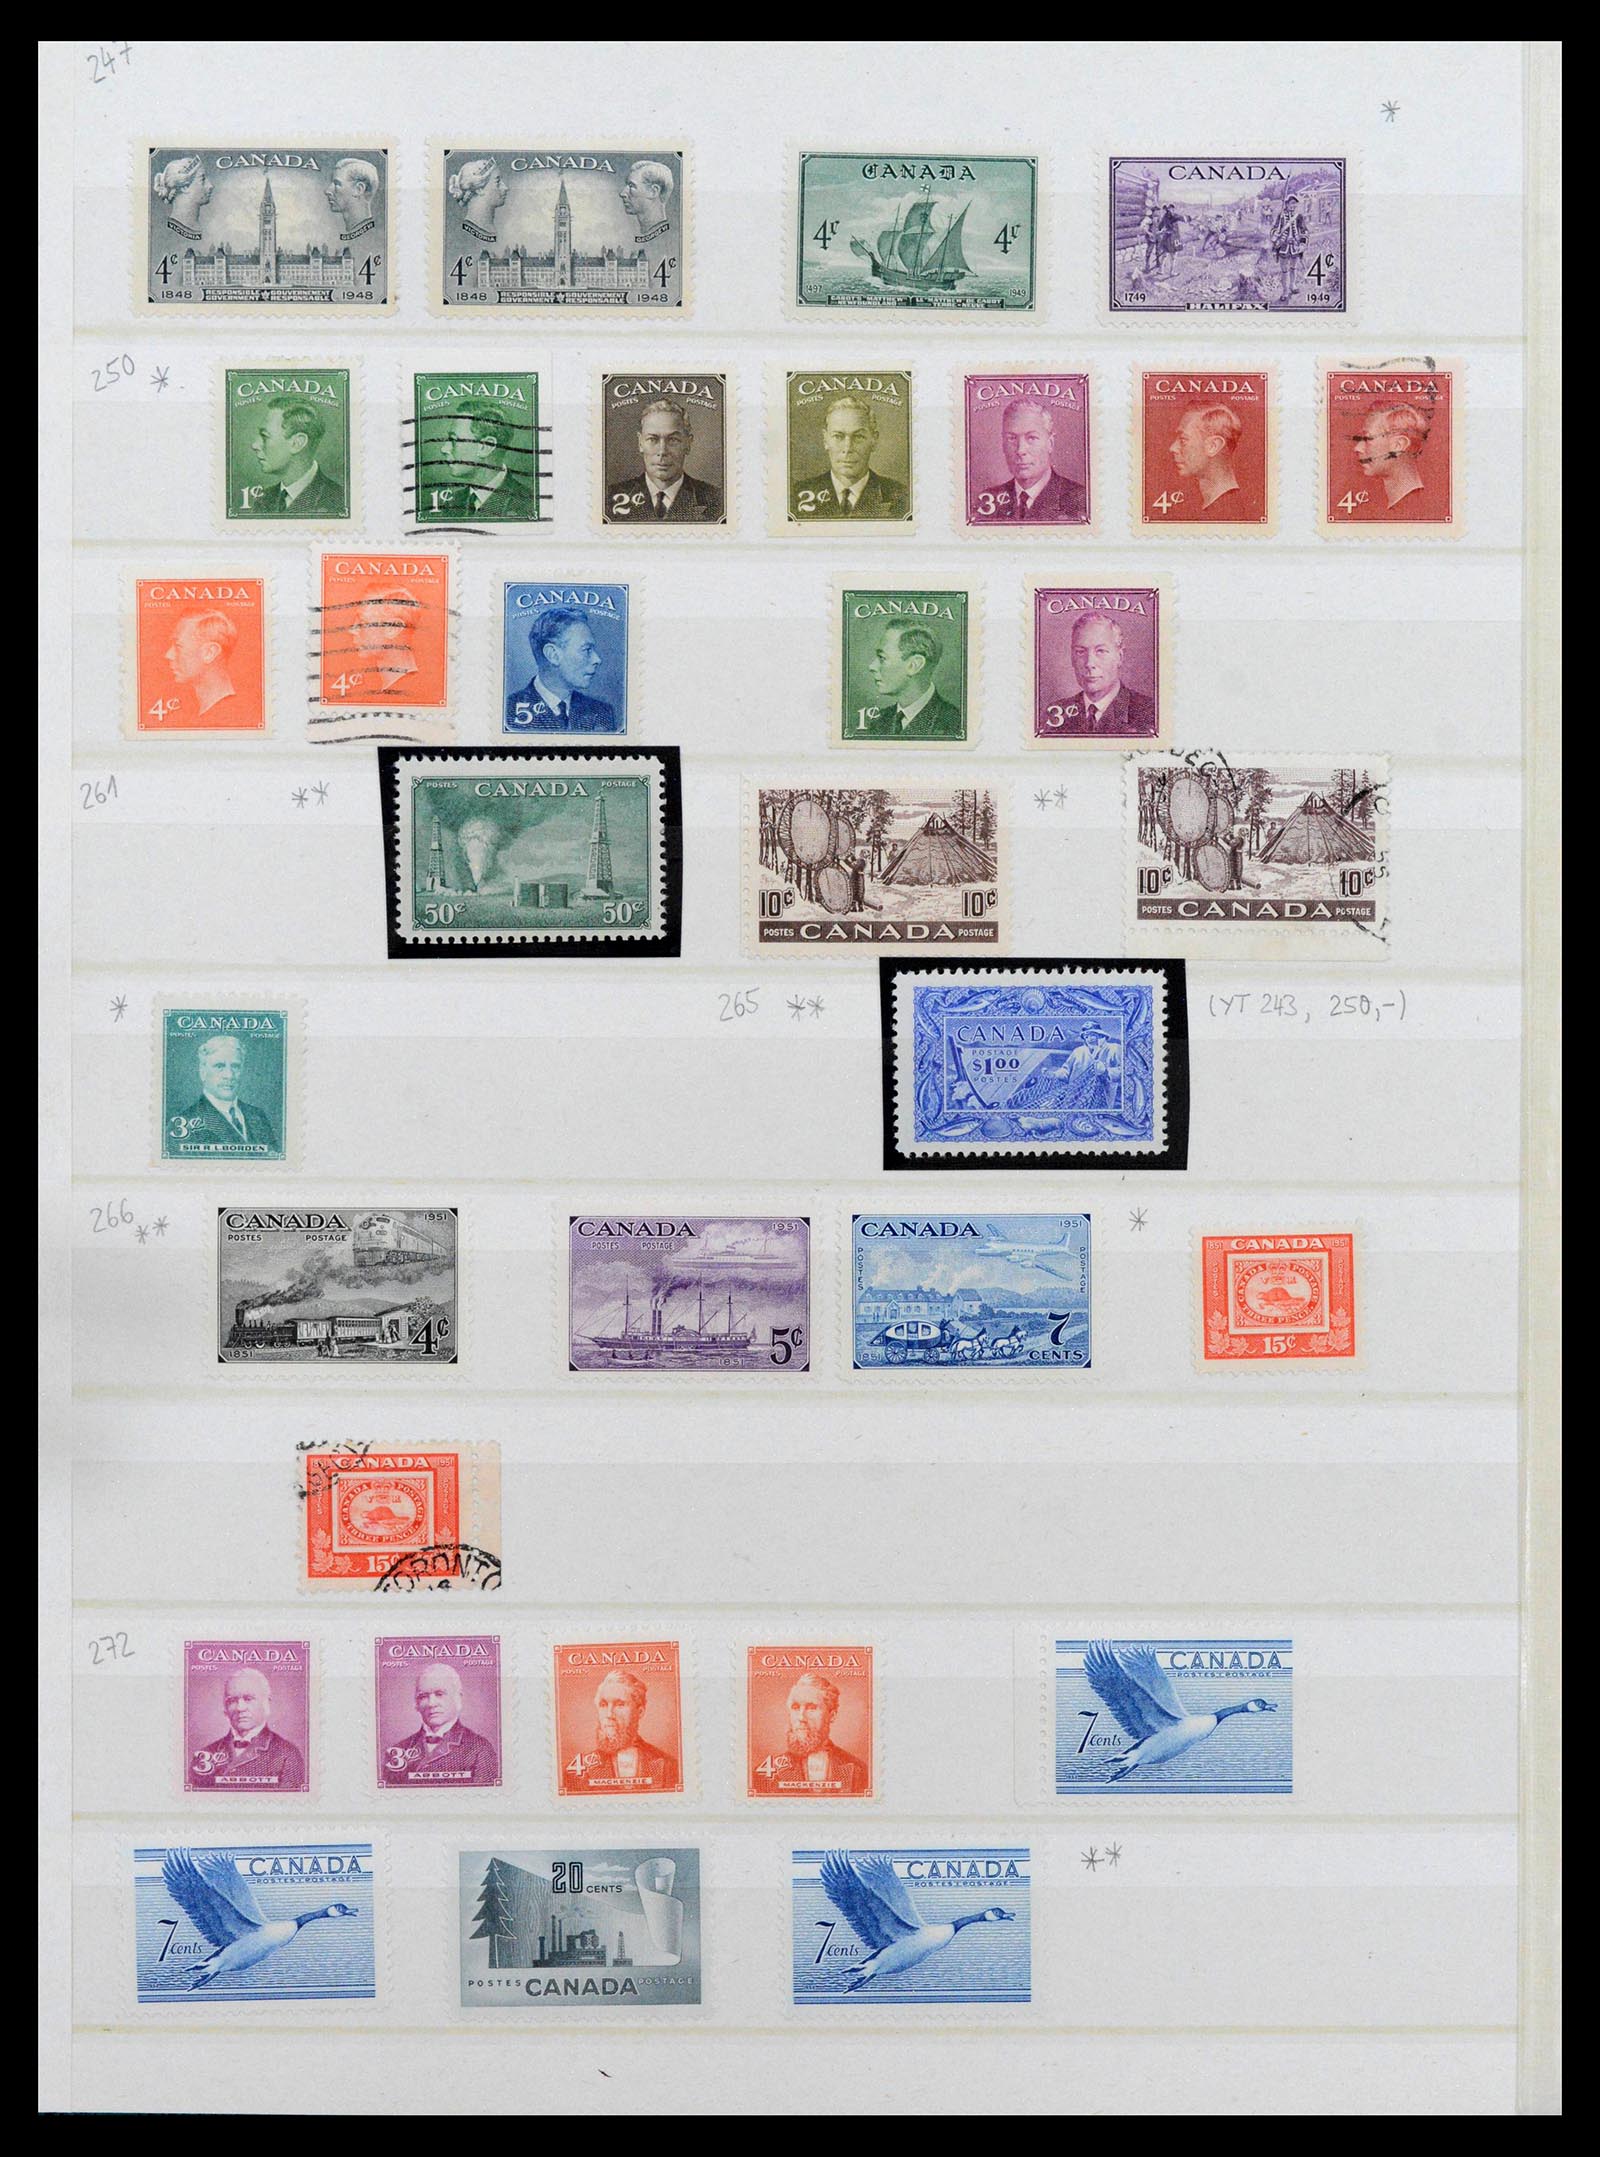 39199 0027 - Stamp collection 39199 Canada and provinces 1851-1970.